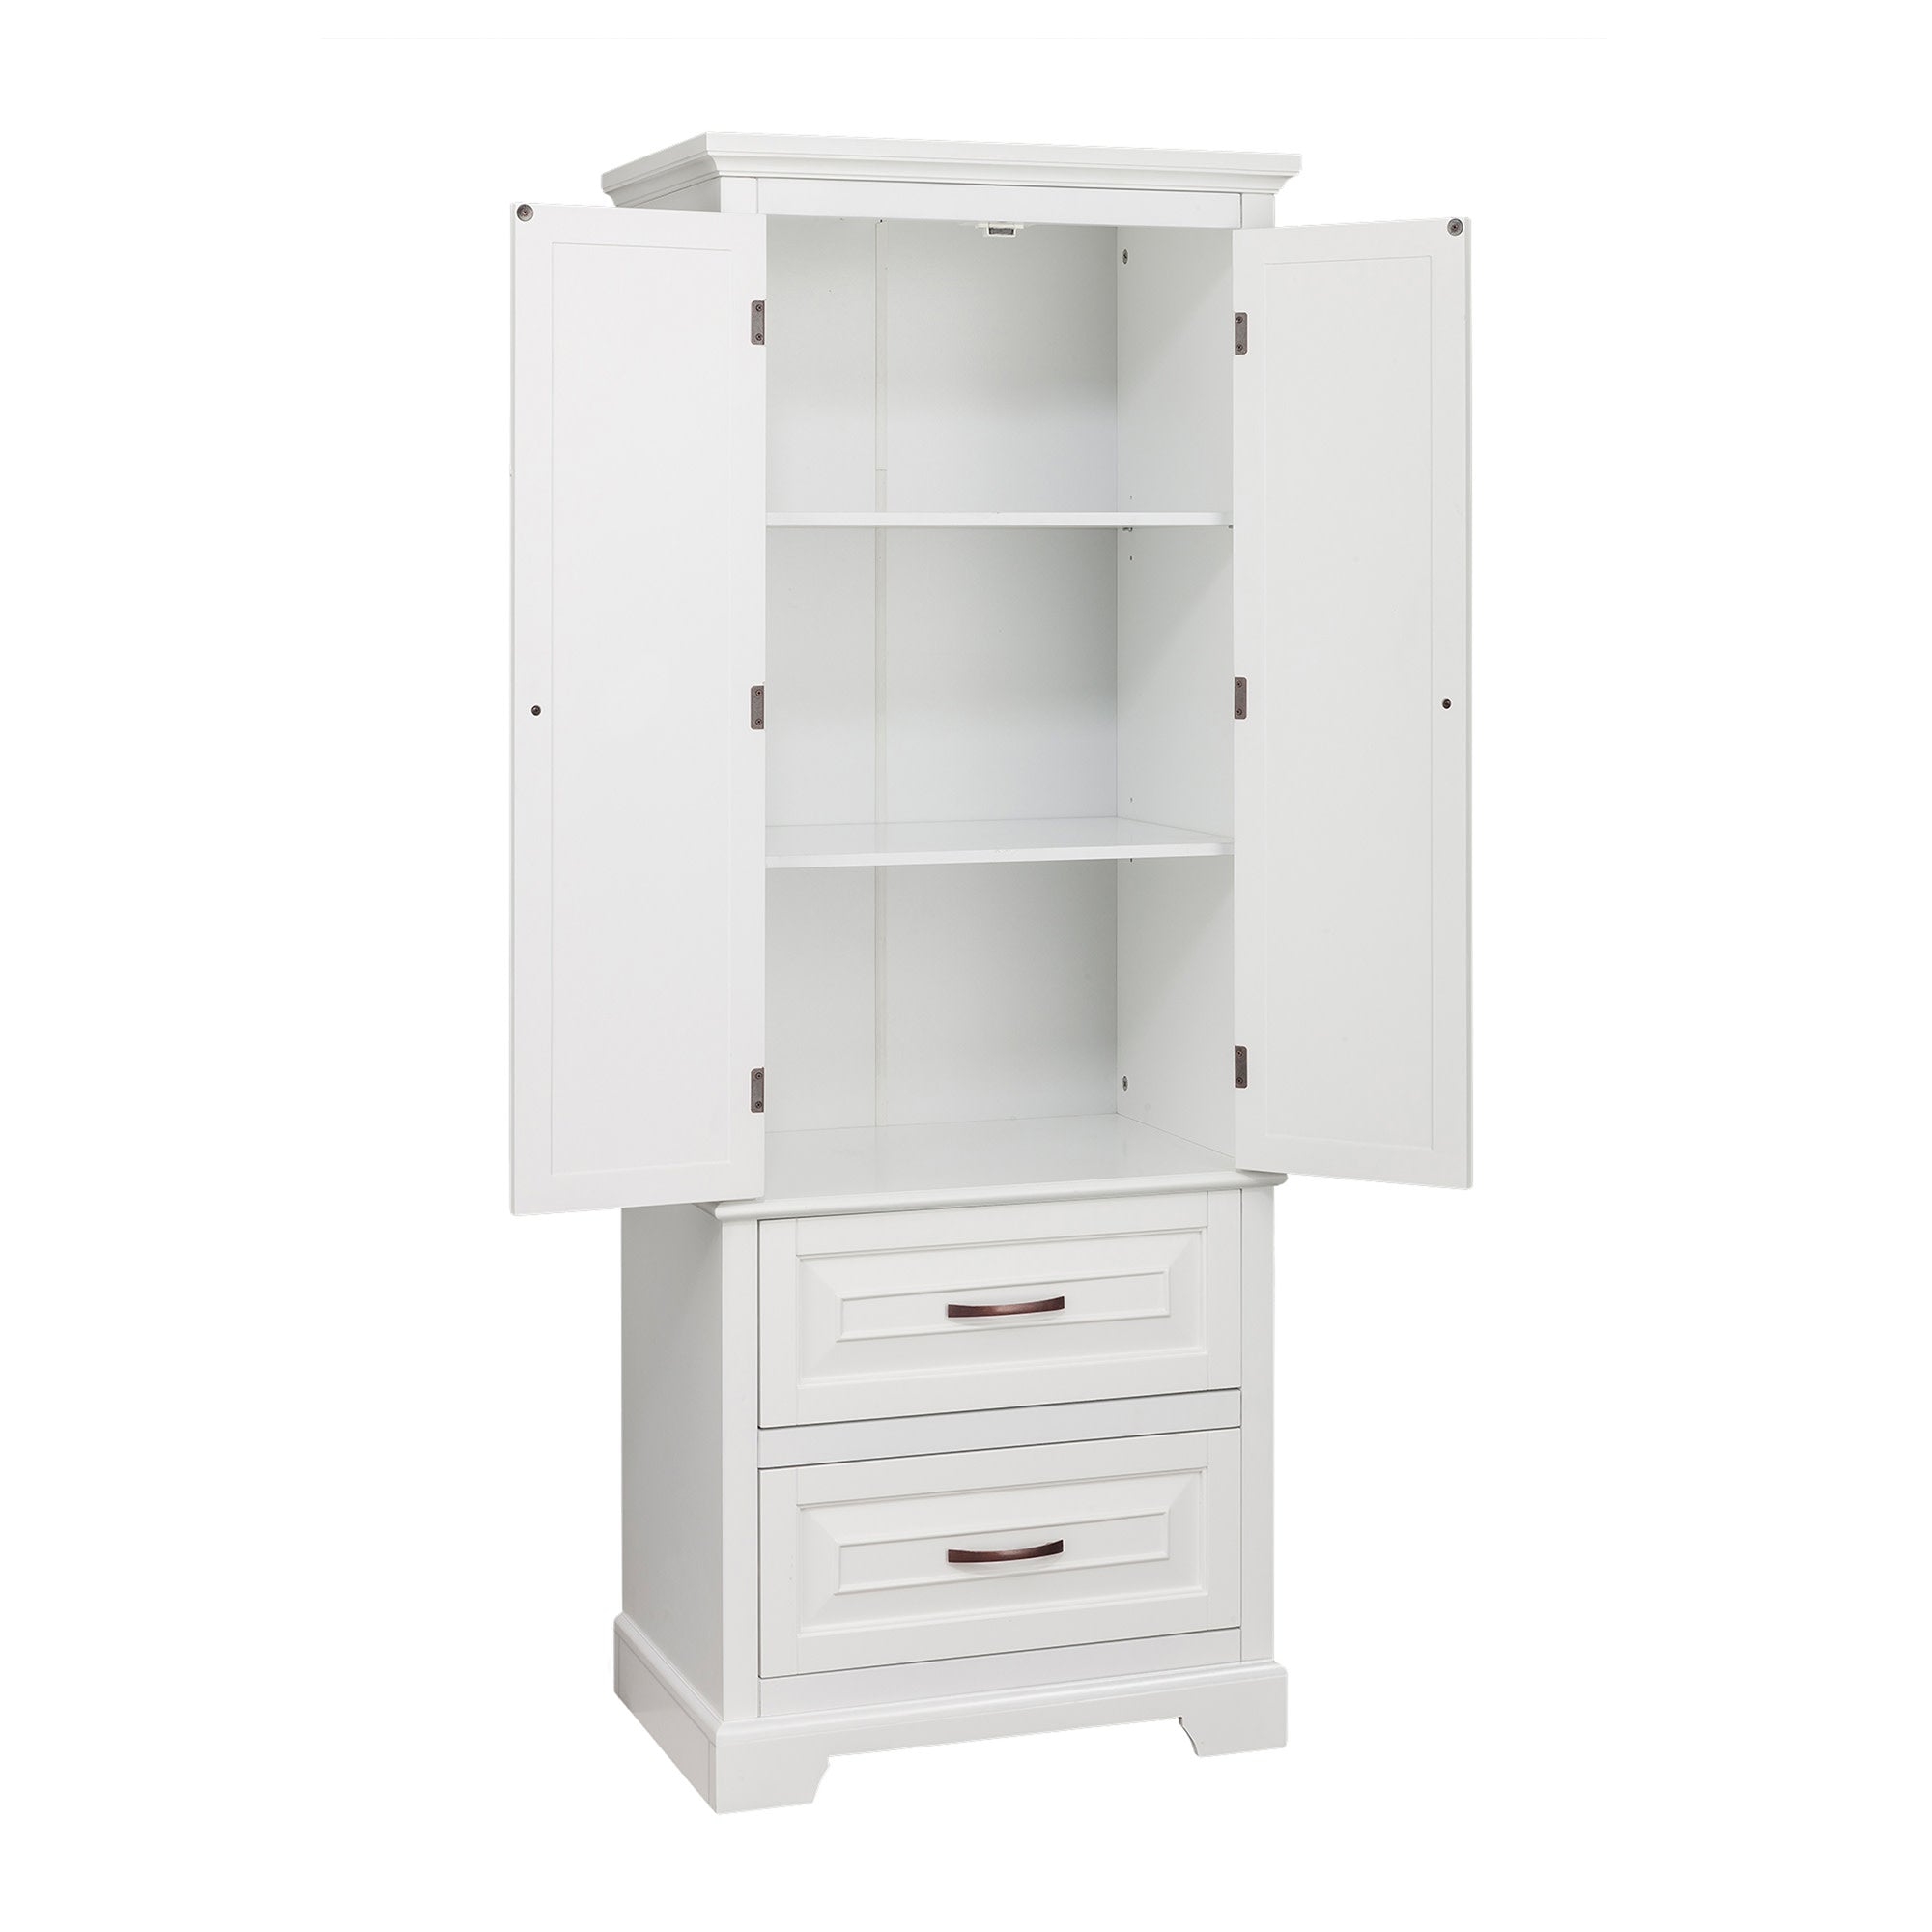 Teamson Home St. James Wooden Linen Tower Cabinet with 2 Drawers, White